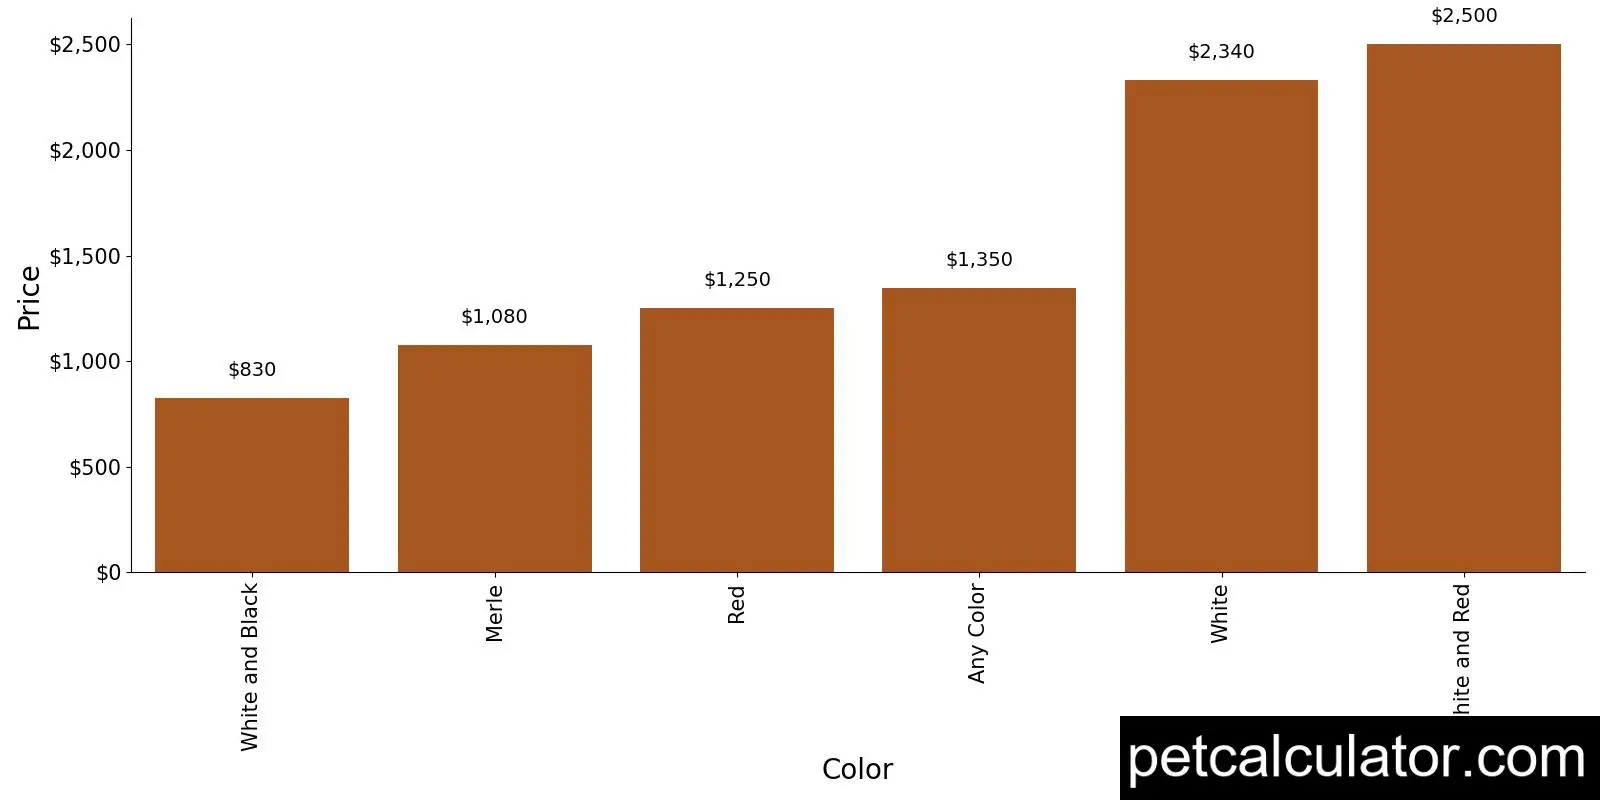 Price of Cockalier by Color 